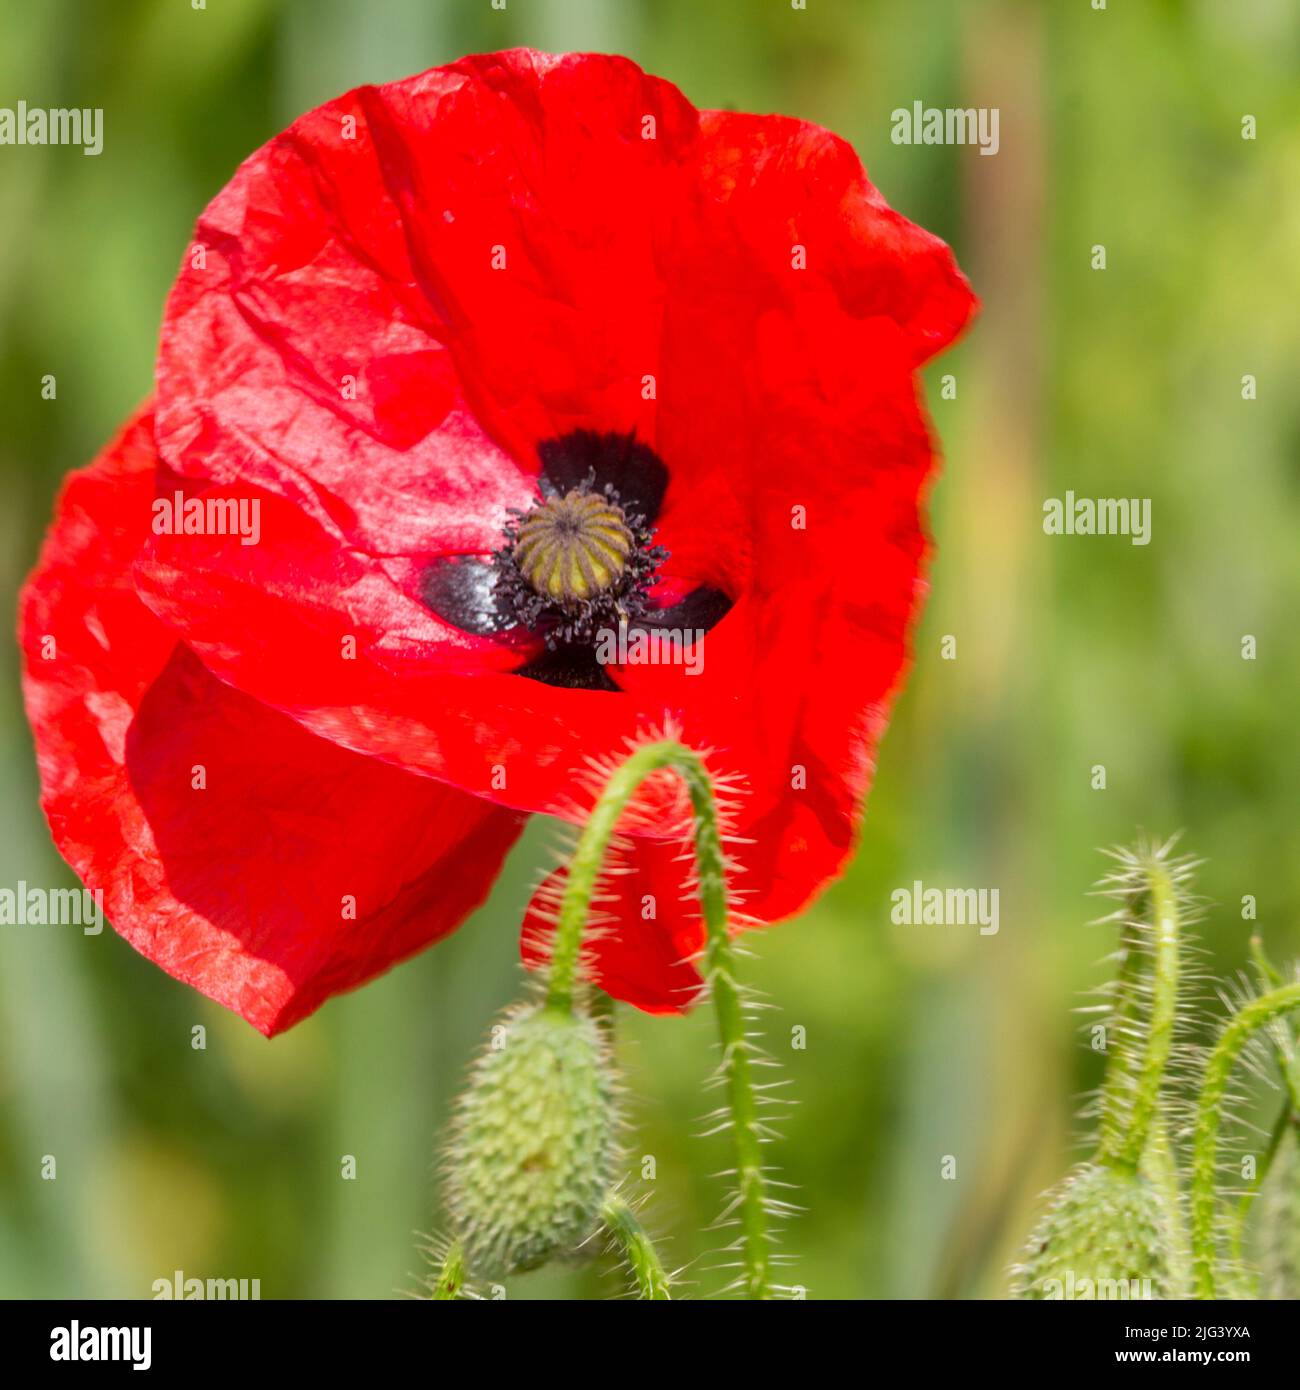 Common poppy four papery scarlet petals on hairy annual wild plant branched leaves likes arable land and disturbed ground image in square format Stock Photo